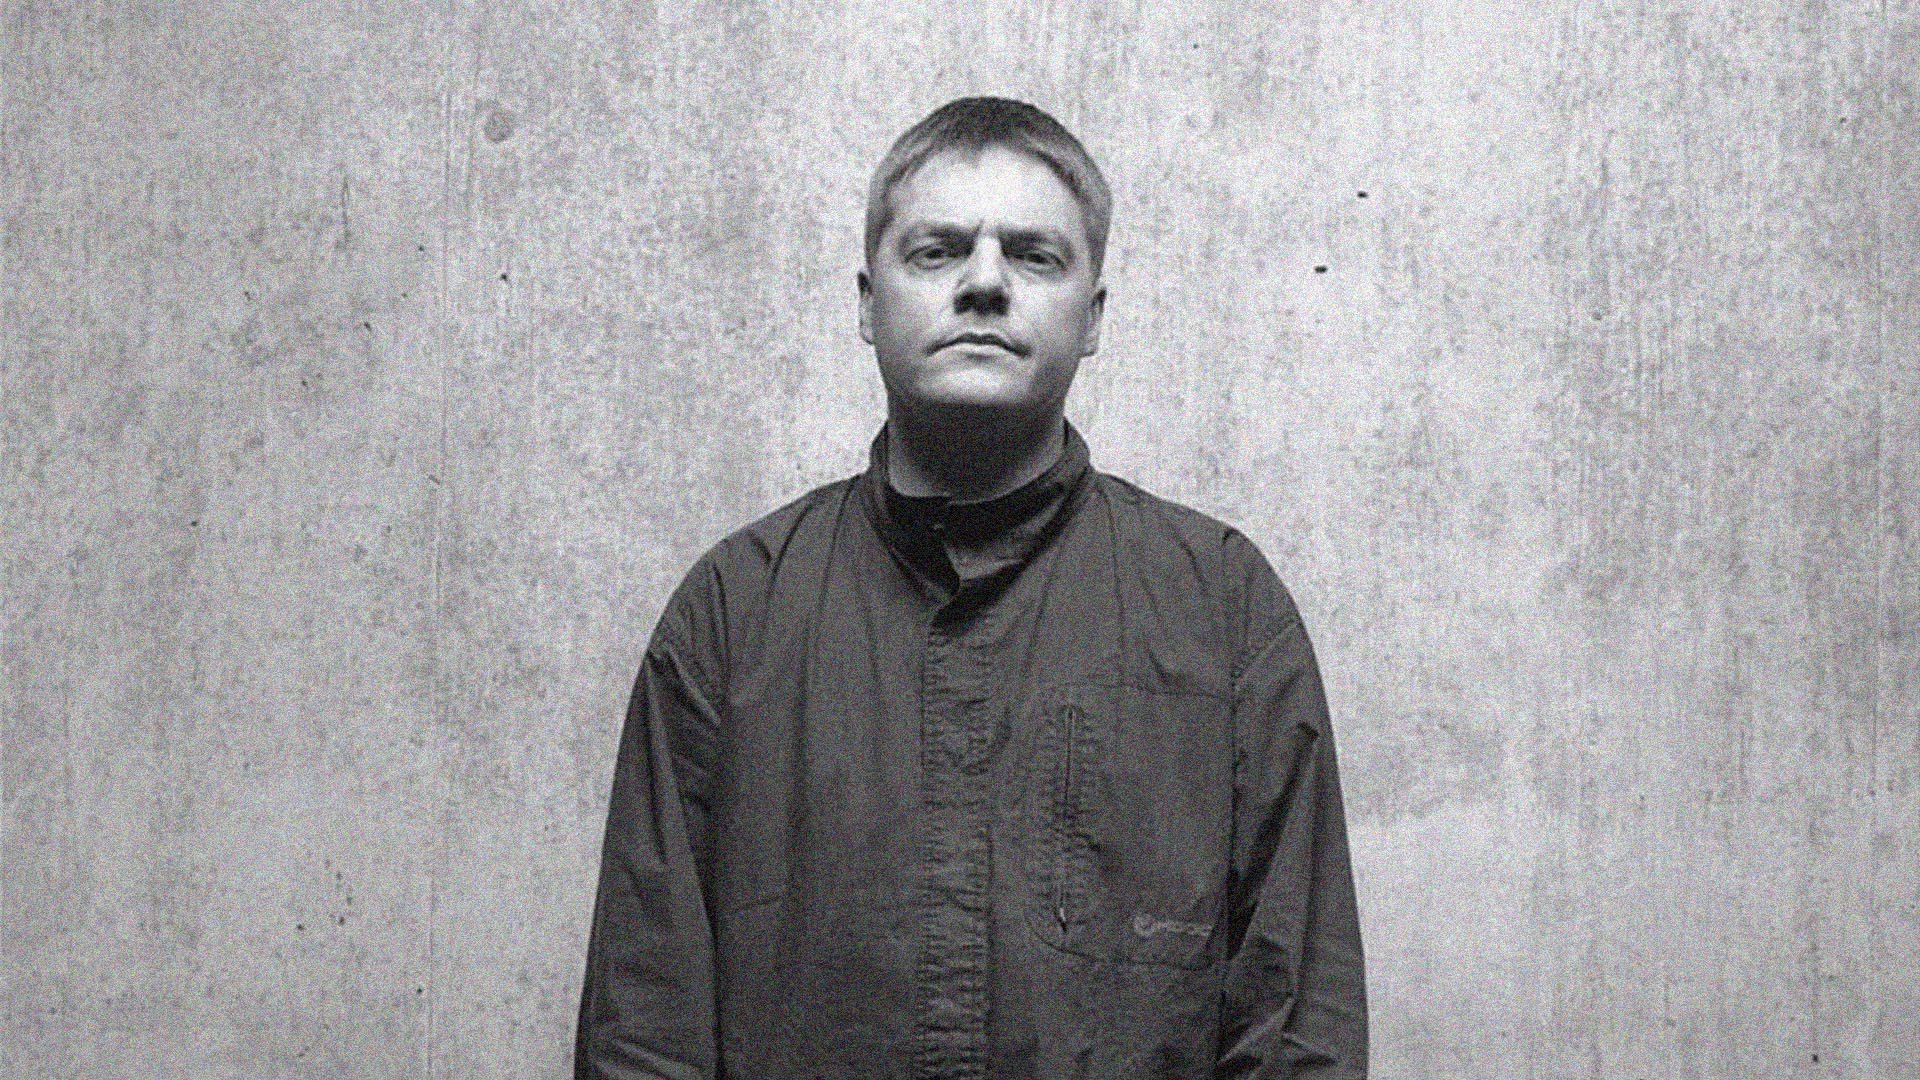 808 State's Andy Barker was an integral part of Manchester’s rave explosion at the turn of the '90s